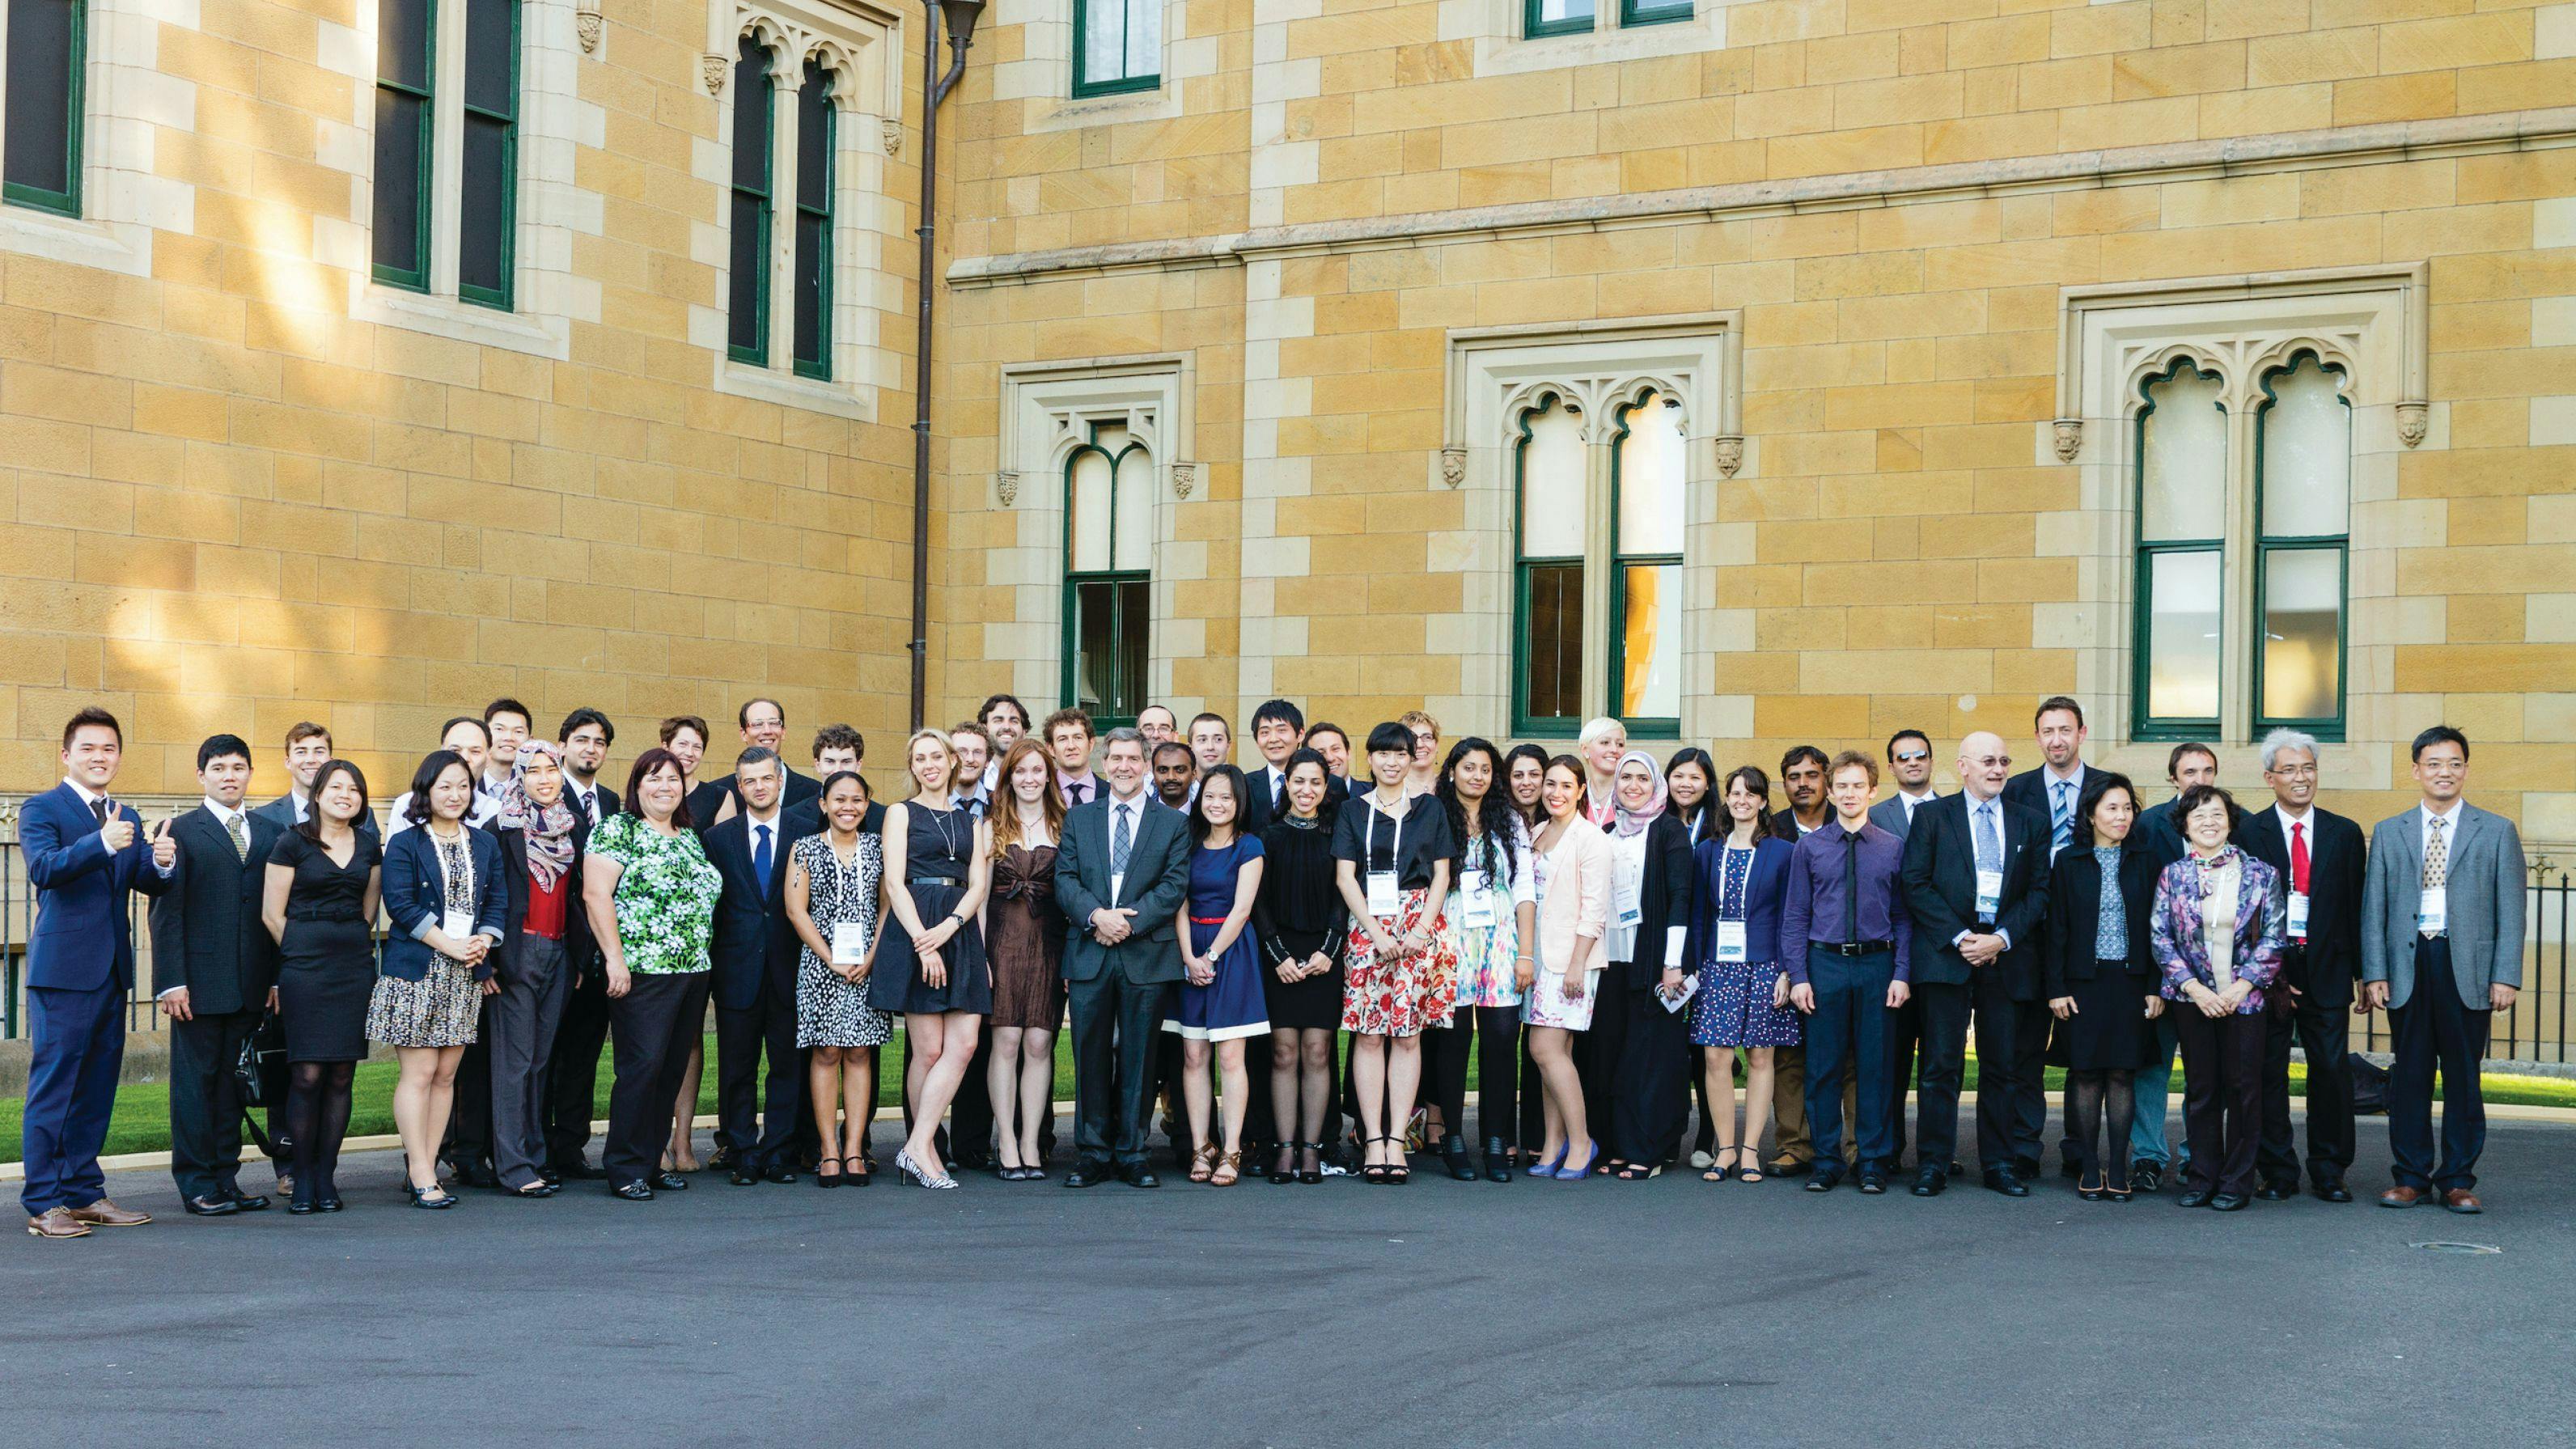 Haddad particularly likes this group photo which includes all of ACROSS at a function during the HPLC 2013 conference in Hobart, which Haddad and Hilder co-chaired. “It shows the scale of what he built in ACROSS,” said Hilder. Image and caption courtesy of Emily Hilder.